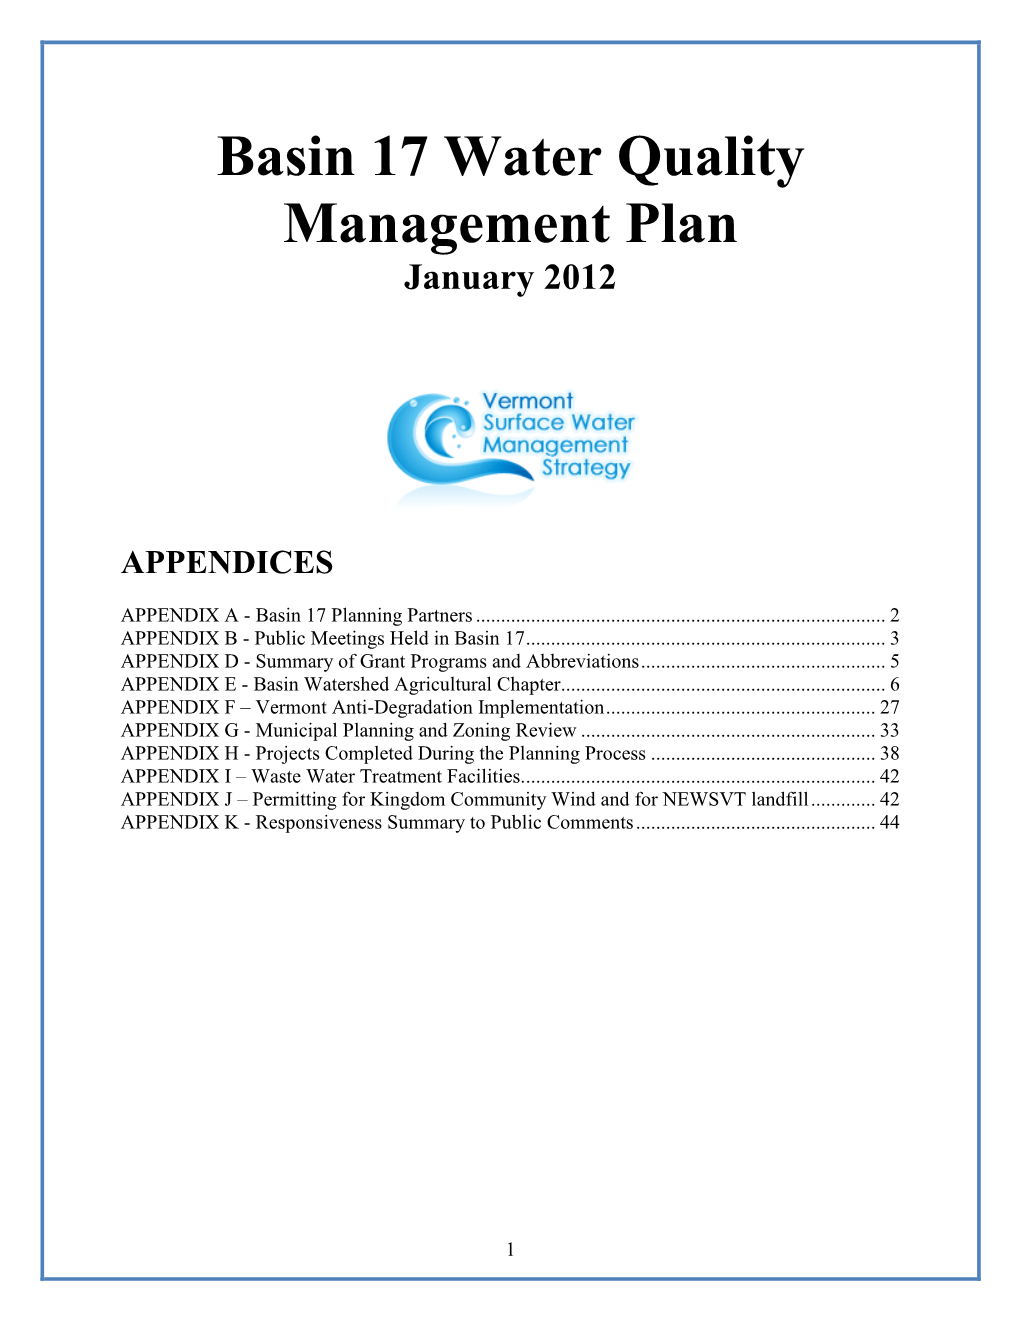 Basin 17 Water Quality Management Plan January 2012